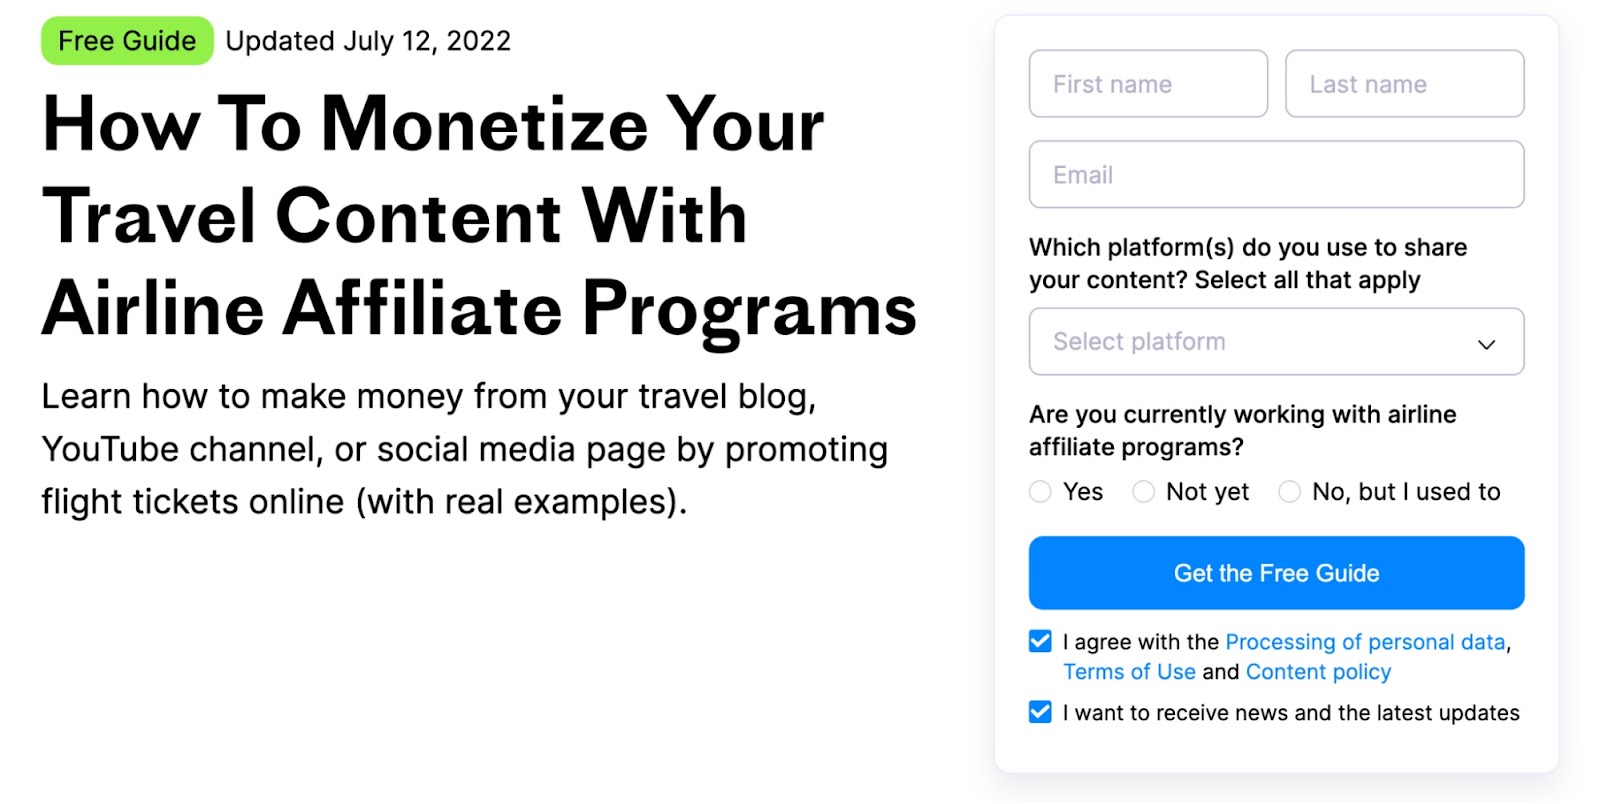 Travelpayouts's guide on monetizing travel content